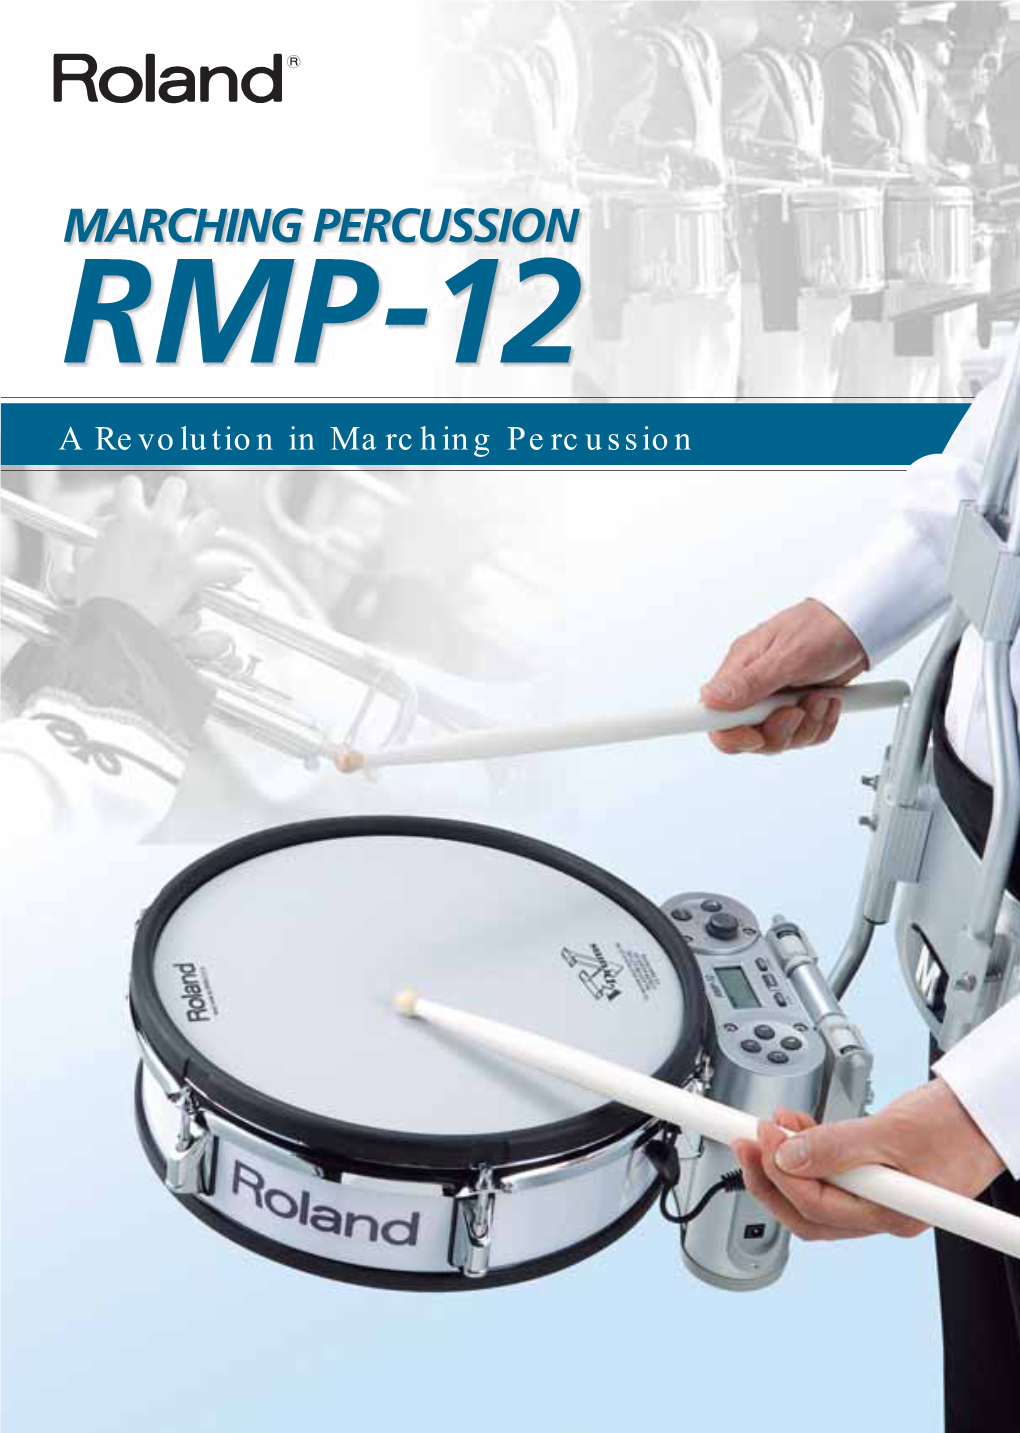 A Revolution in Marching Percussion Modern Marching Percussion for Practice and Performance